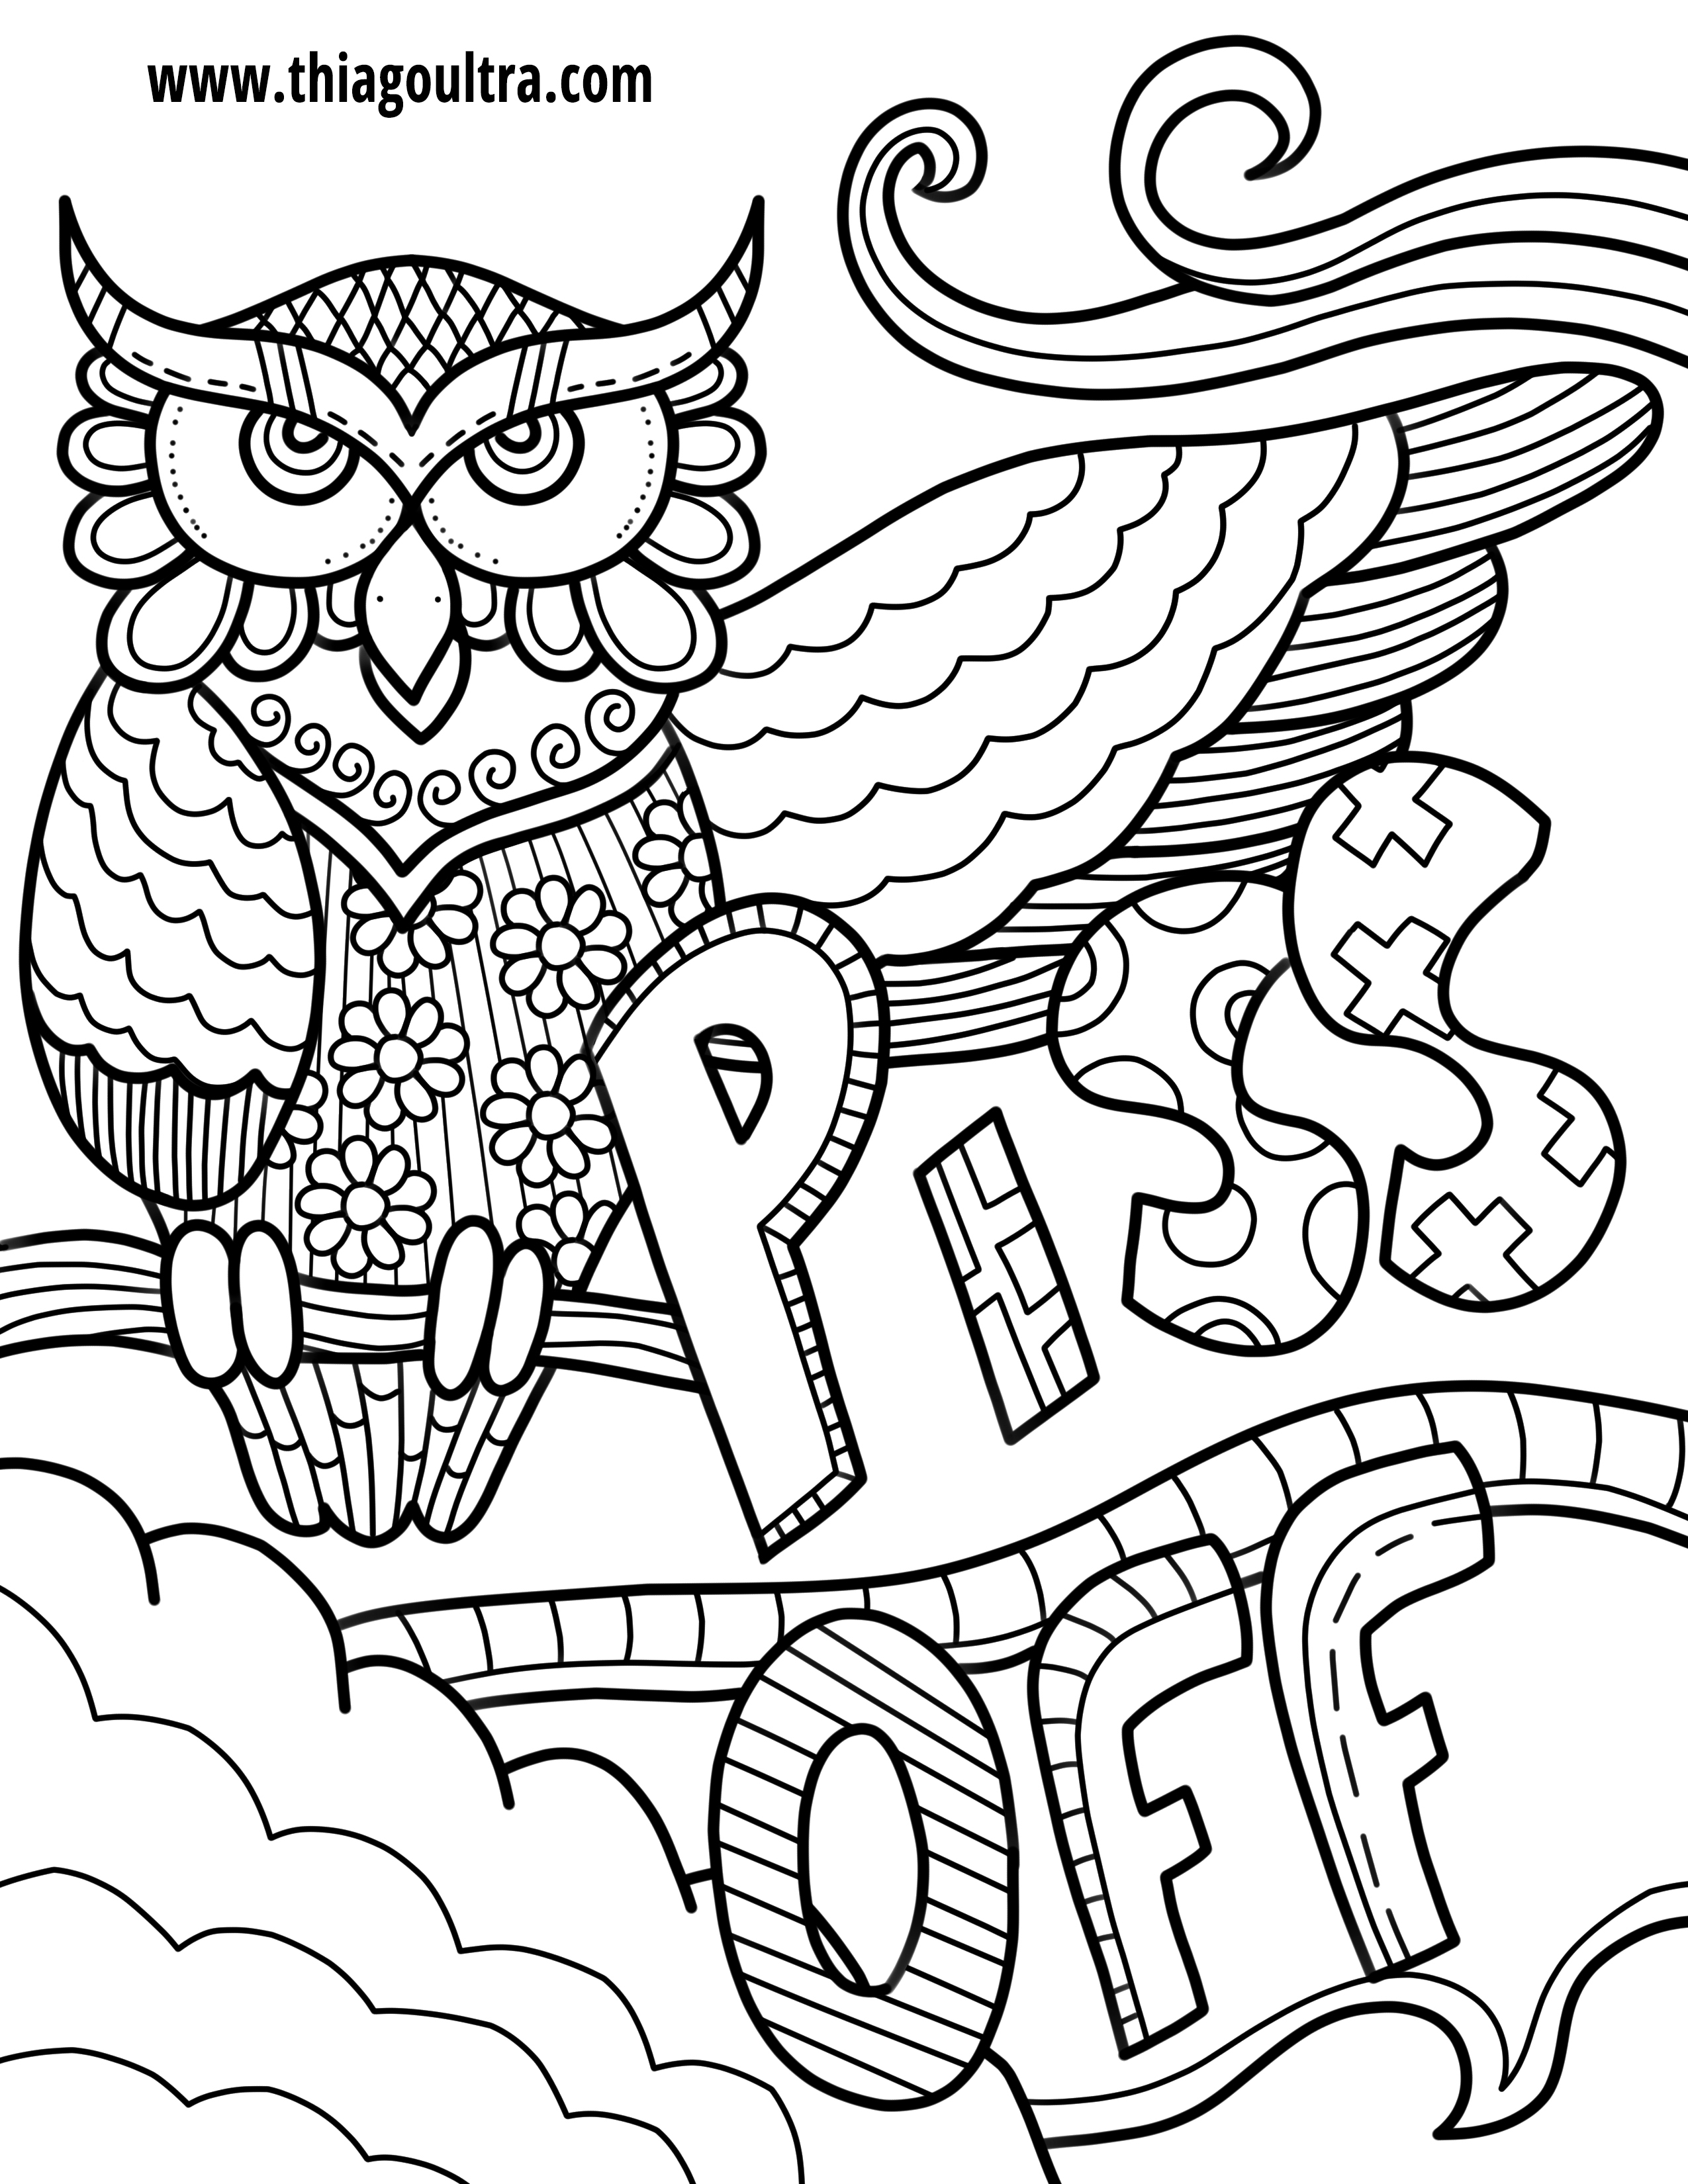 Free Printable Coloring Pages For Adults Pdf at GetColorings.com | Free